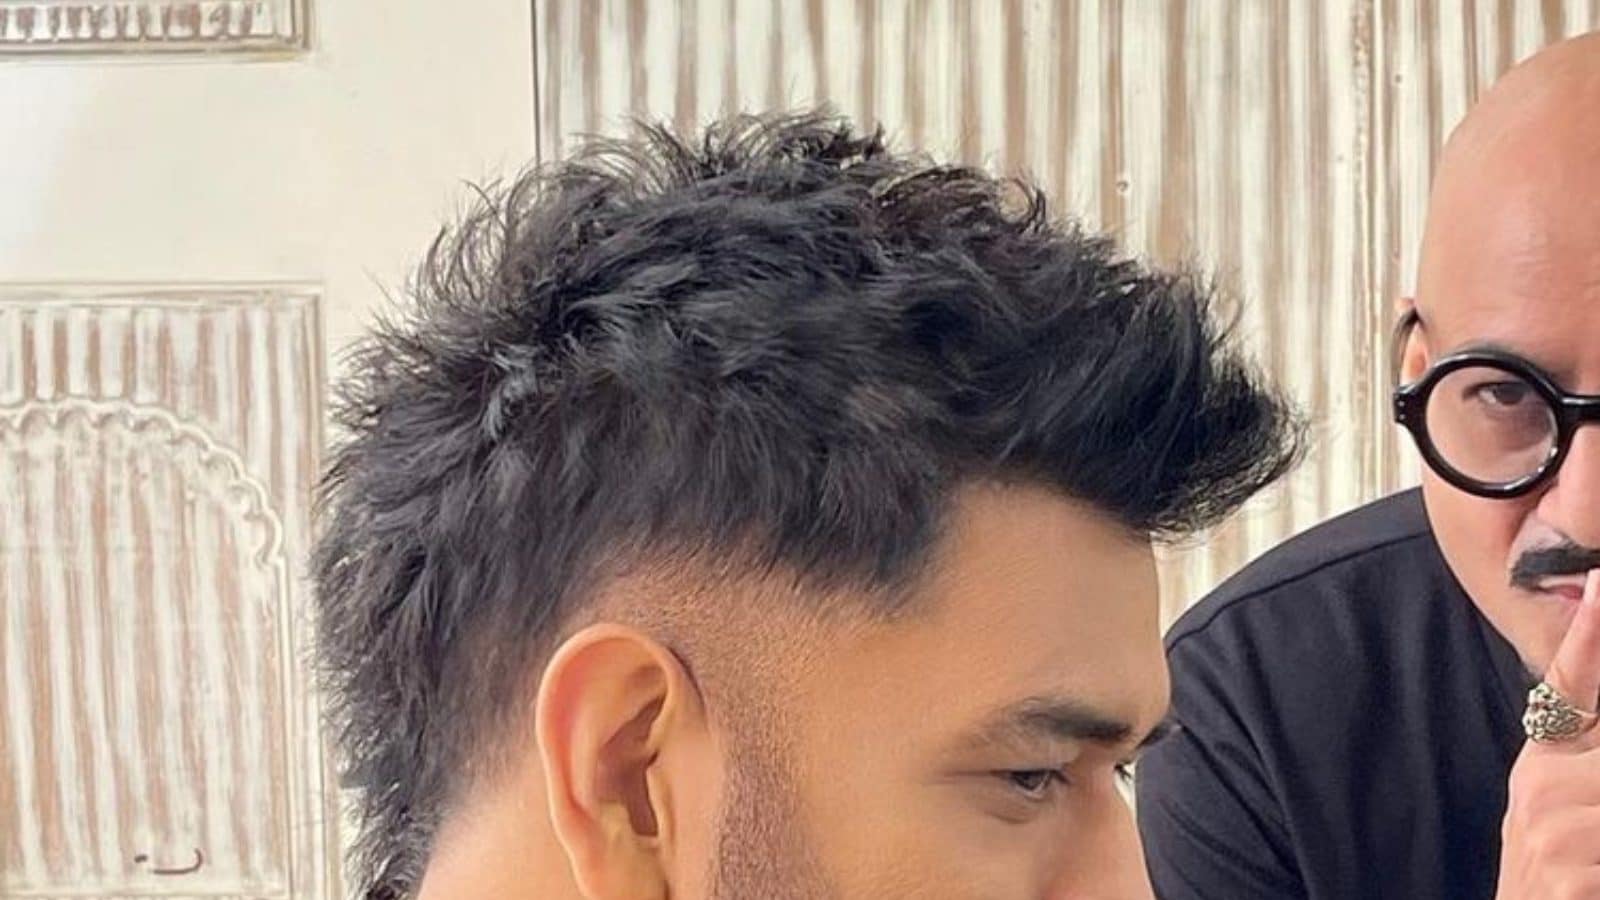 MS Dhoni rocks 'The Jarhead' hairstyle | TheHealthSite.com